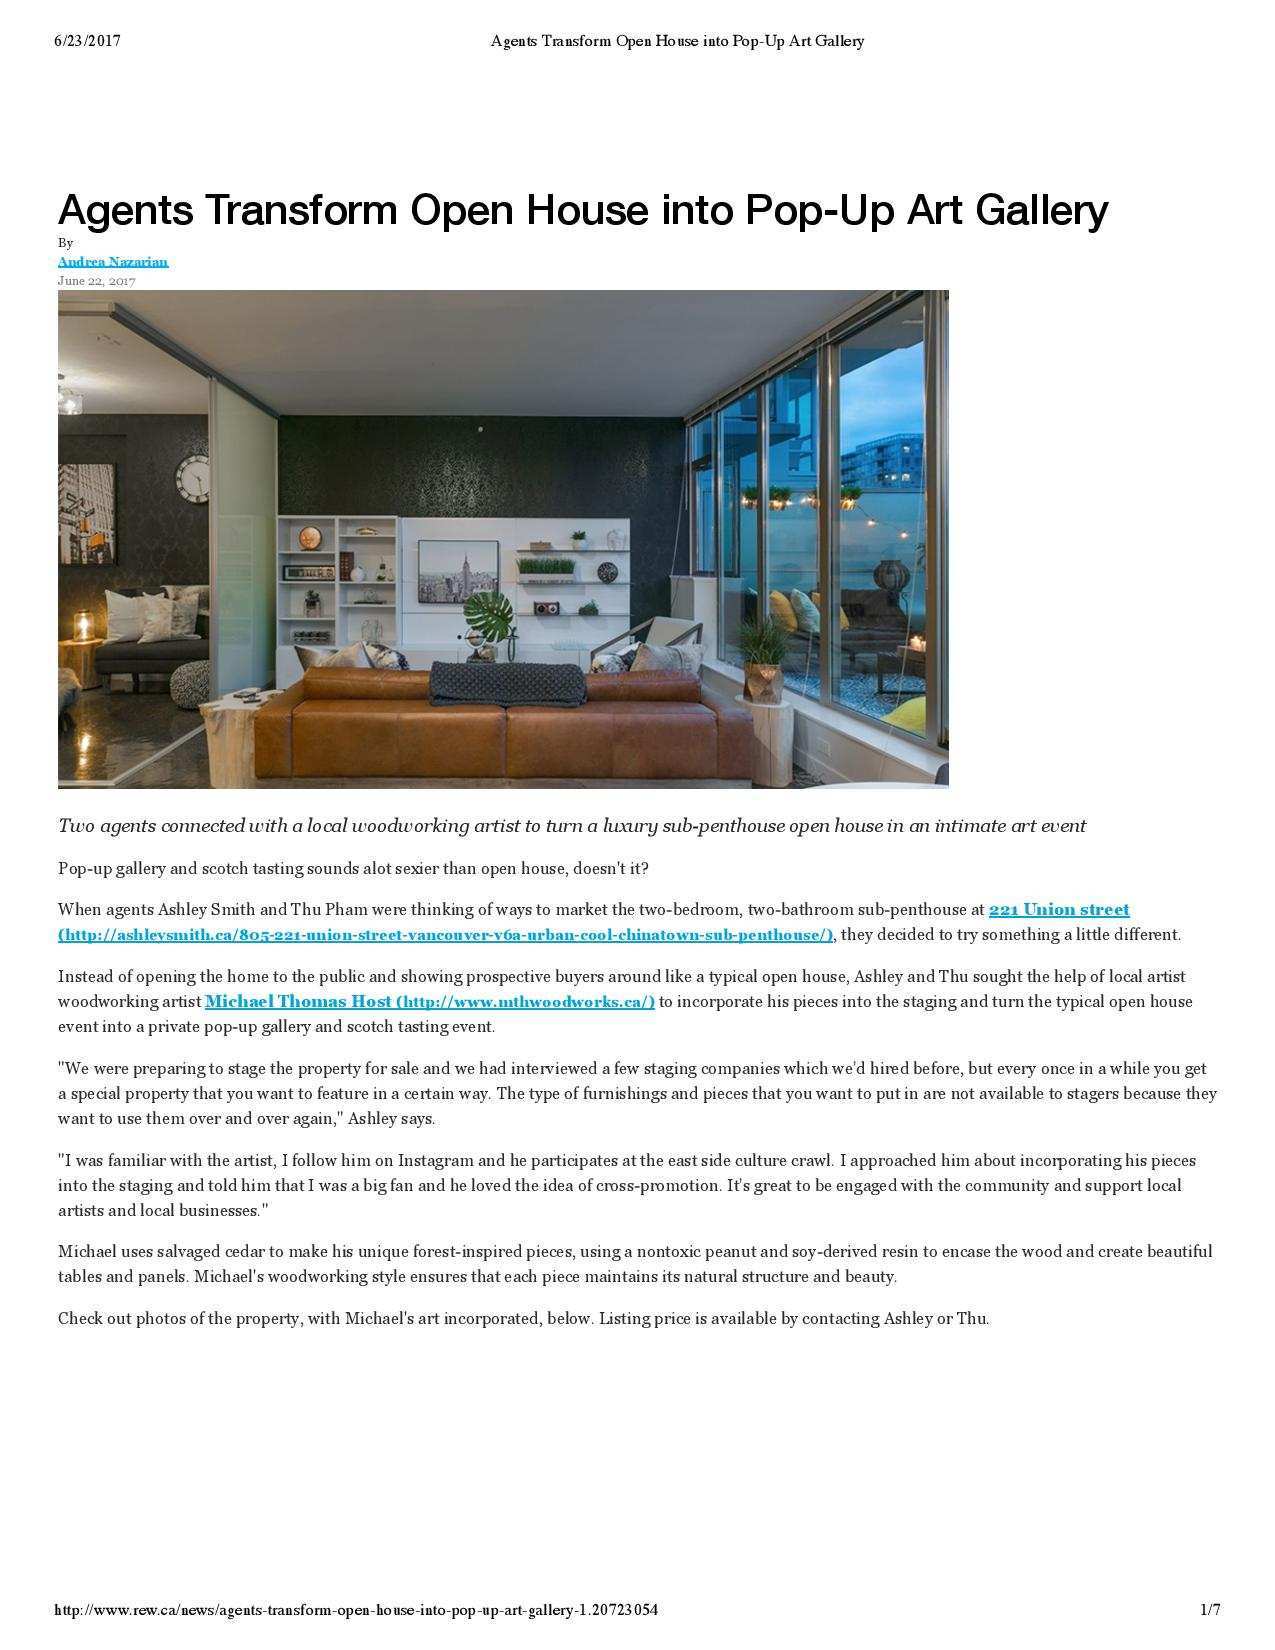 Agent Transforms Open House into Pop-Up Art Gallery